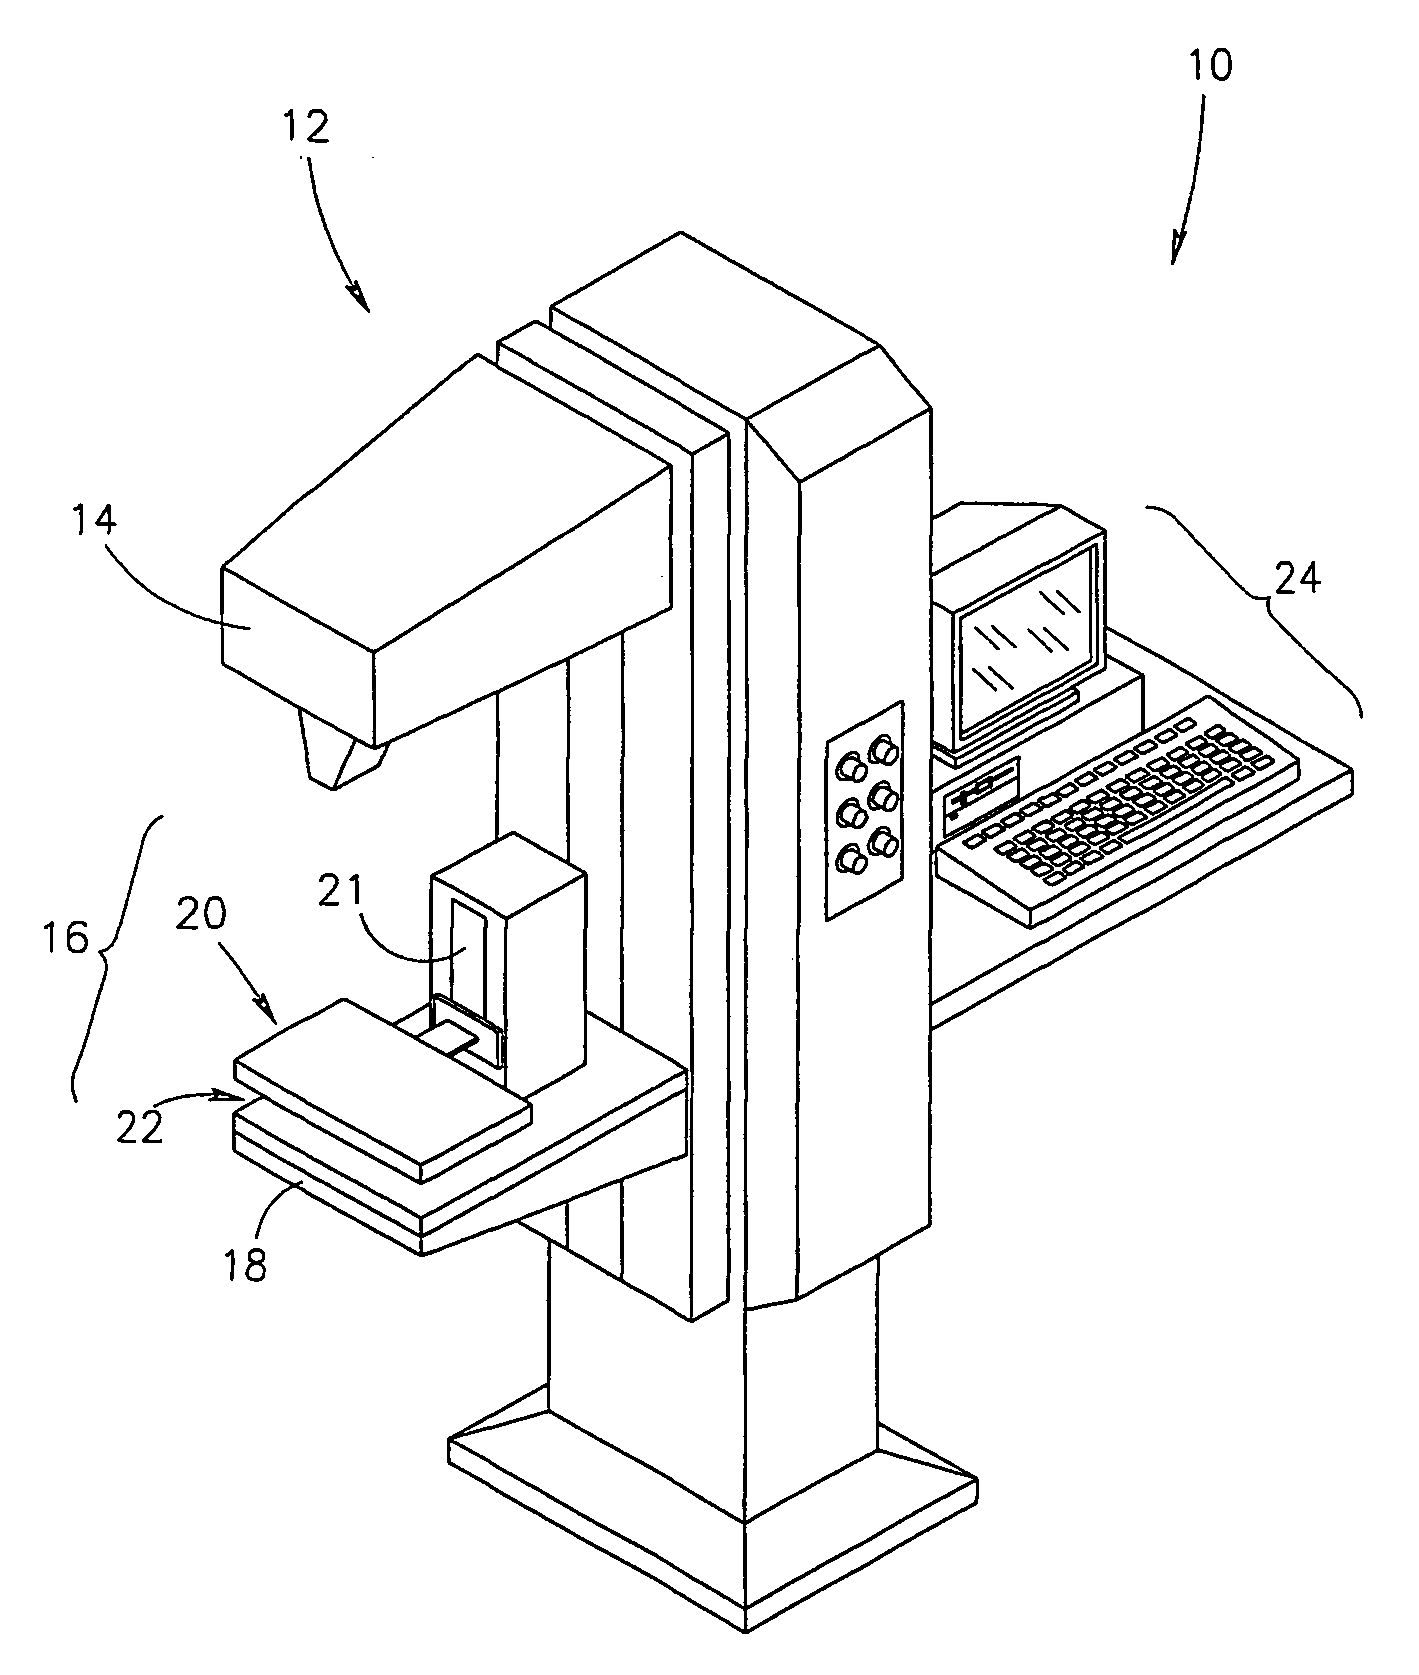 Apparatus for impedance imaging coupled with another modality